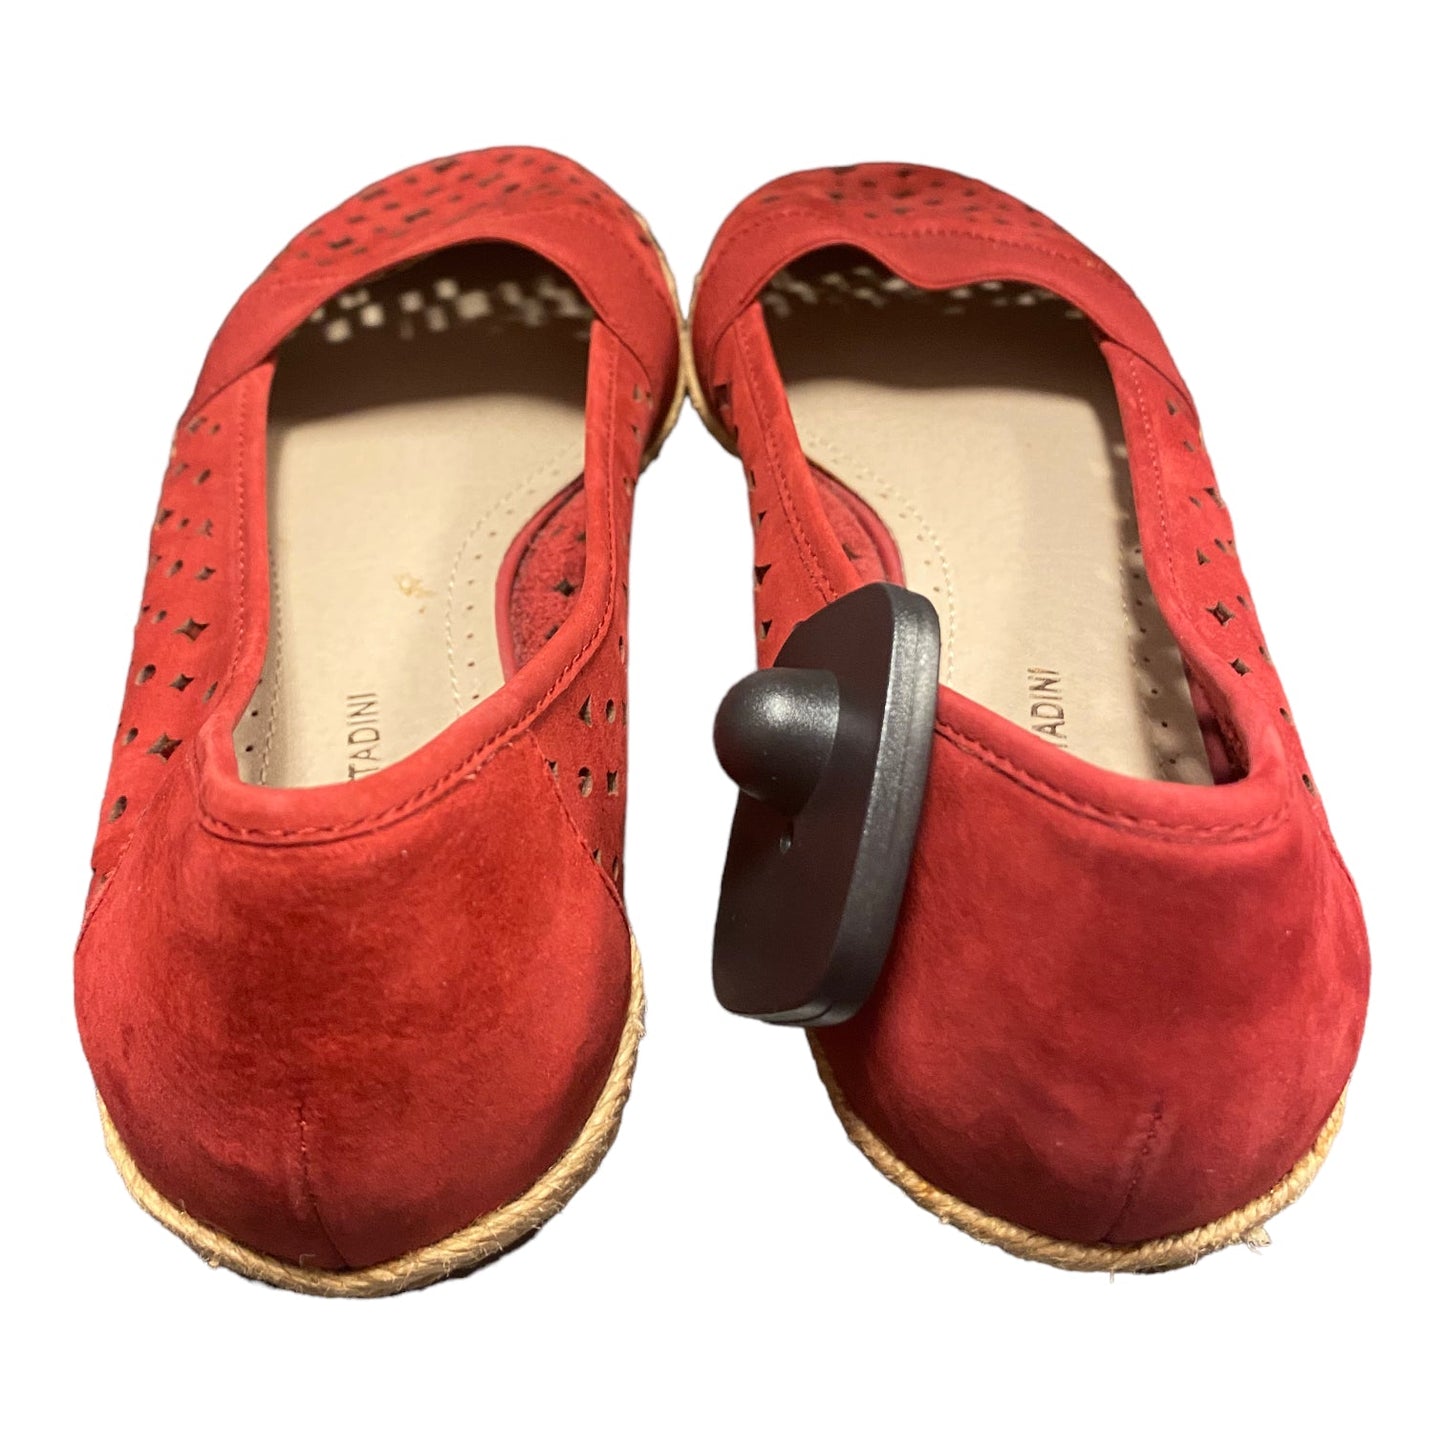 Red Shoes Flats Adrienne Vittadini, Size 8